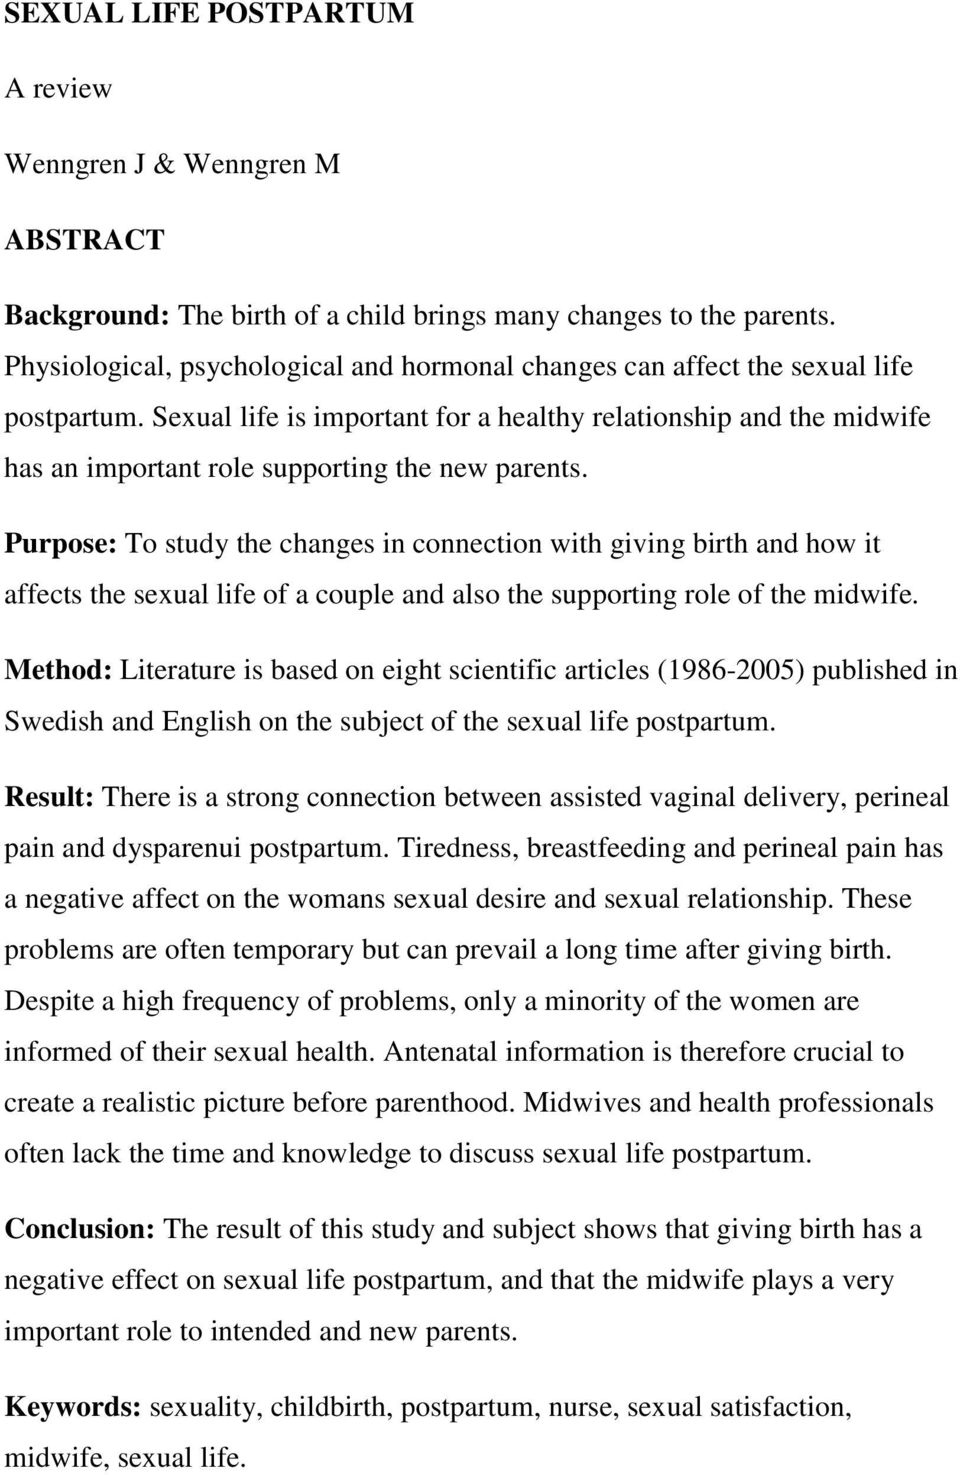 Sexual life is important for a healthy relationship and the midwife has an important role supporting the new parents.